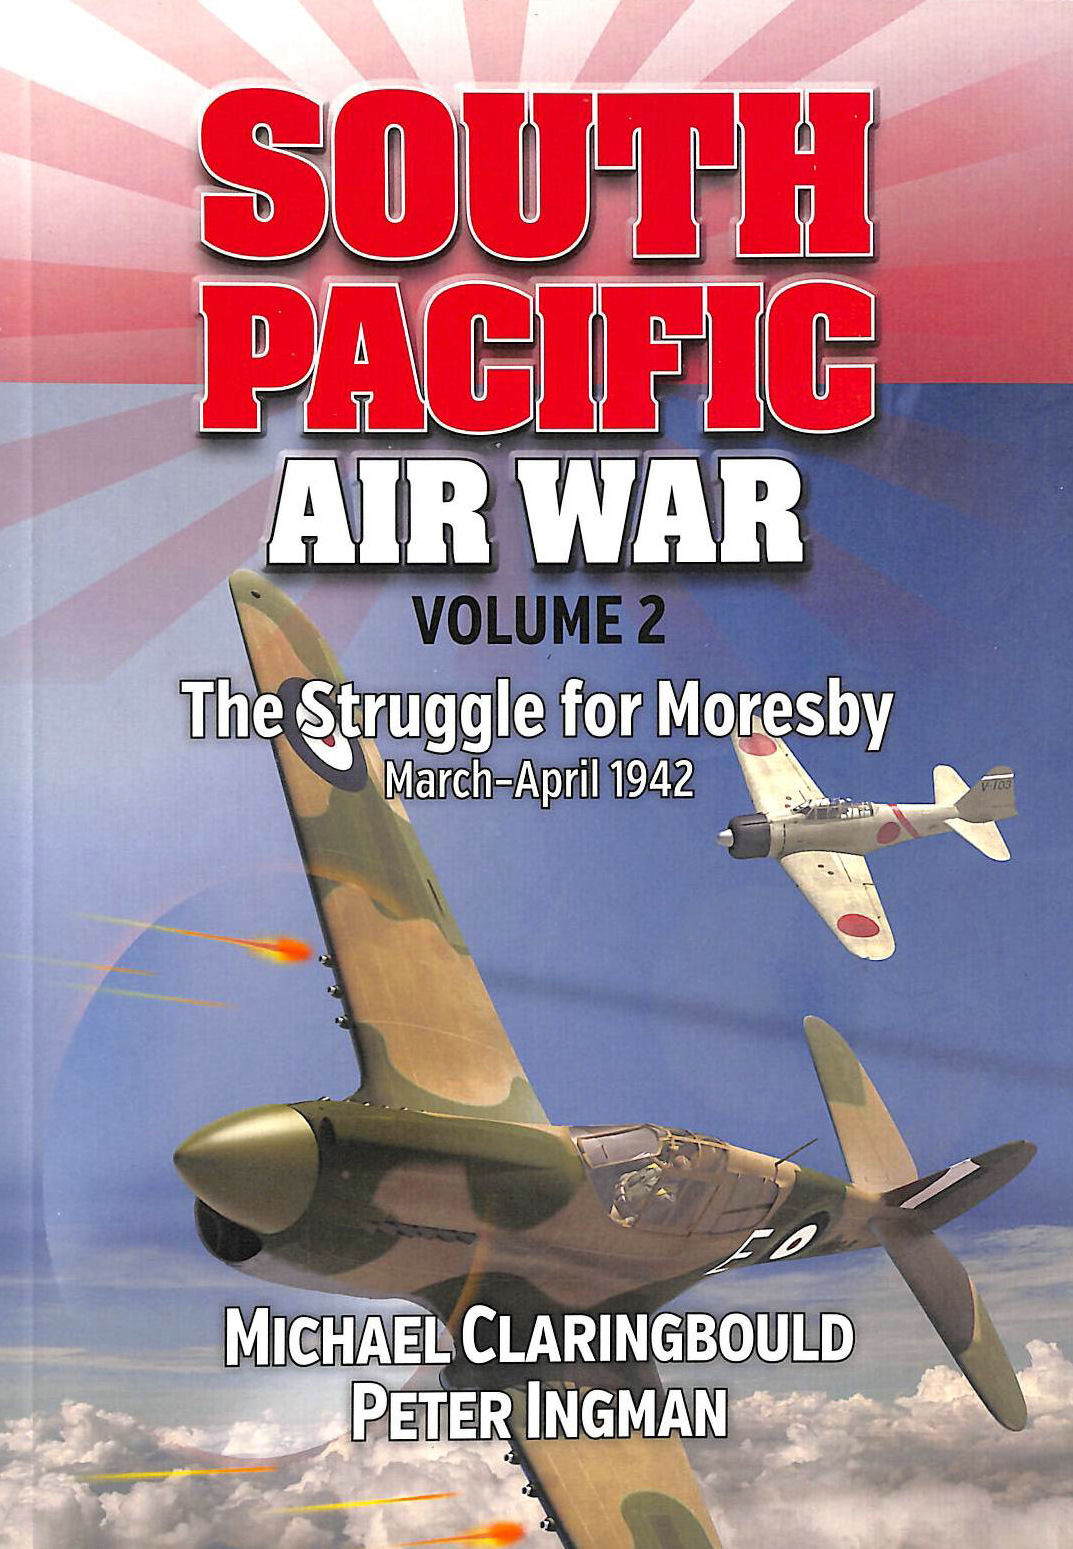  - South Pacific Air War Volume 2: The Struggle for Moresby March - April 1942